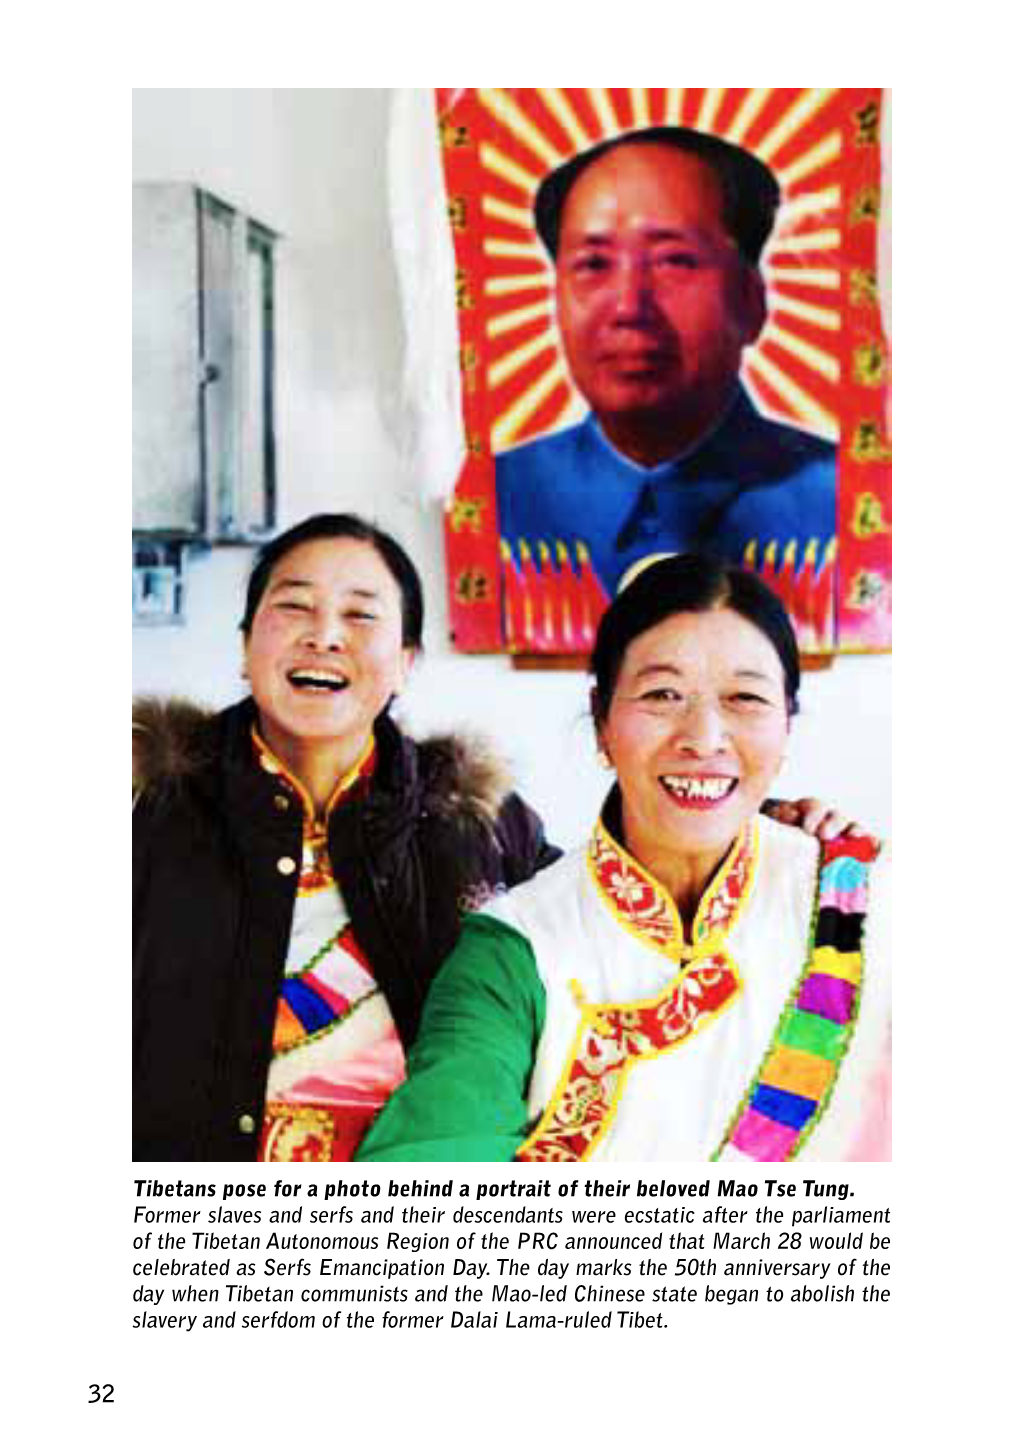 Tibetans Pose for a Photo Behind a Portrait of Their Beloved Mao Tse Tung